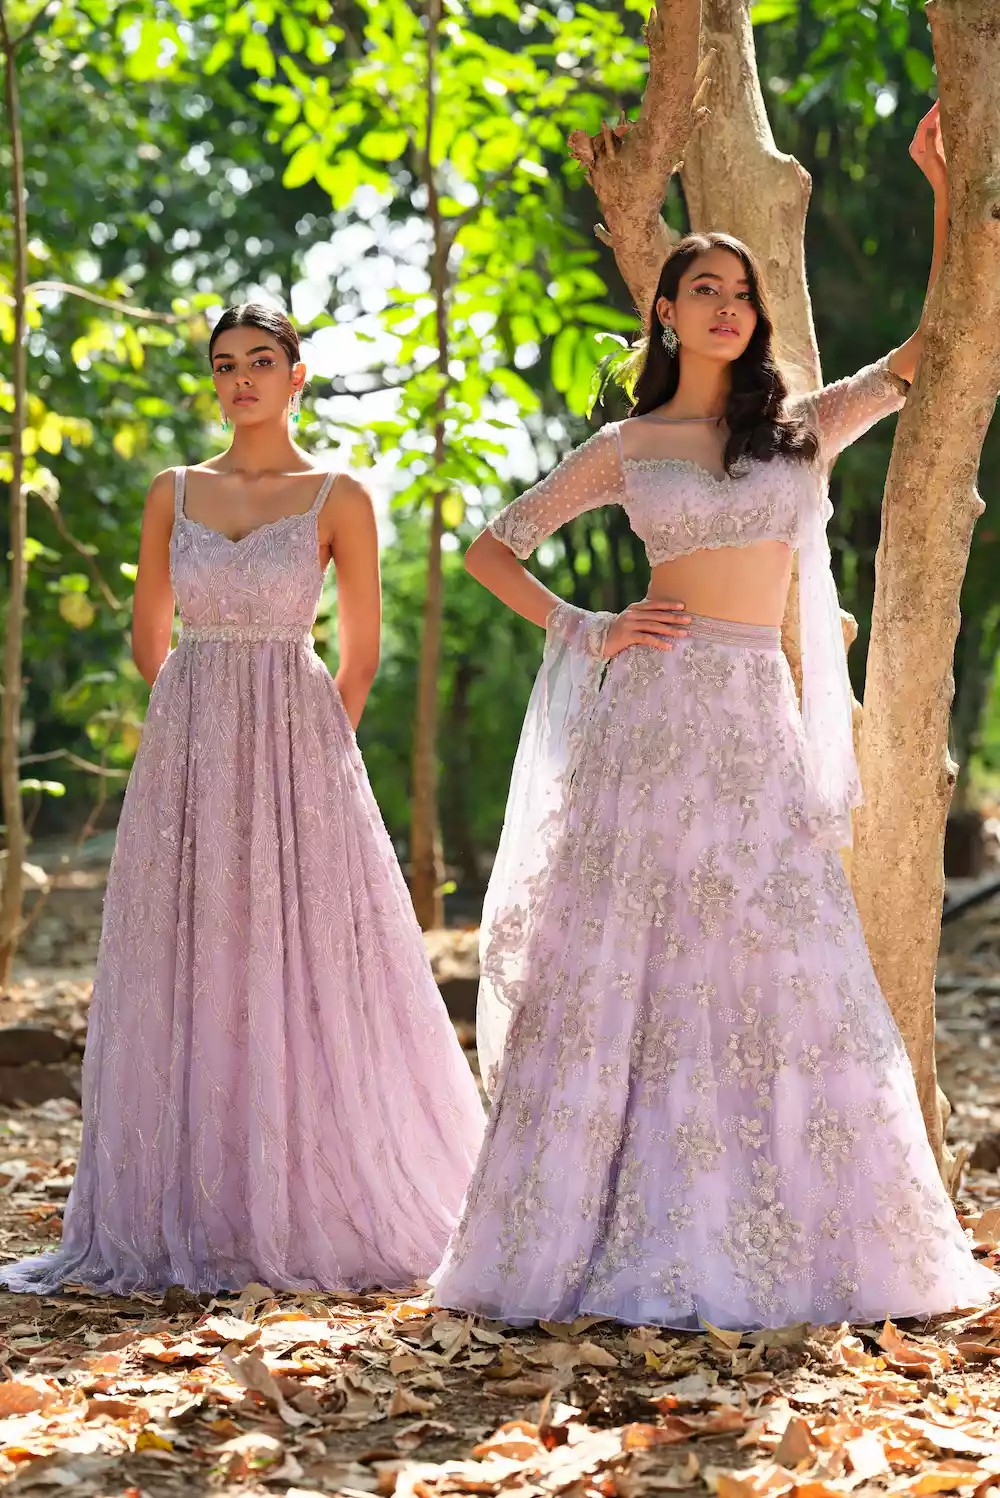 23 Bridal Outfit Trends For 2021 According To India’s Top Bridalwear Designers